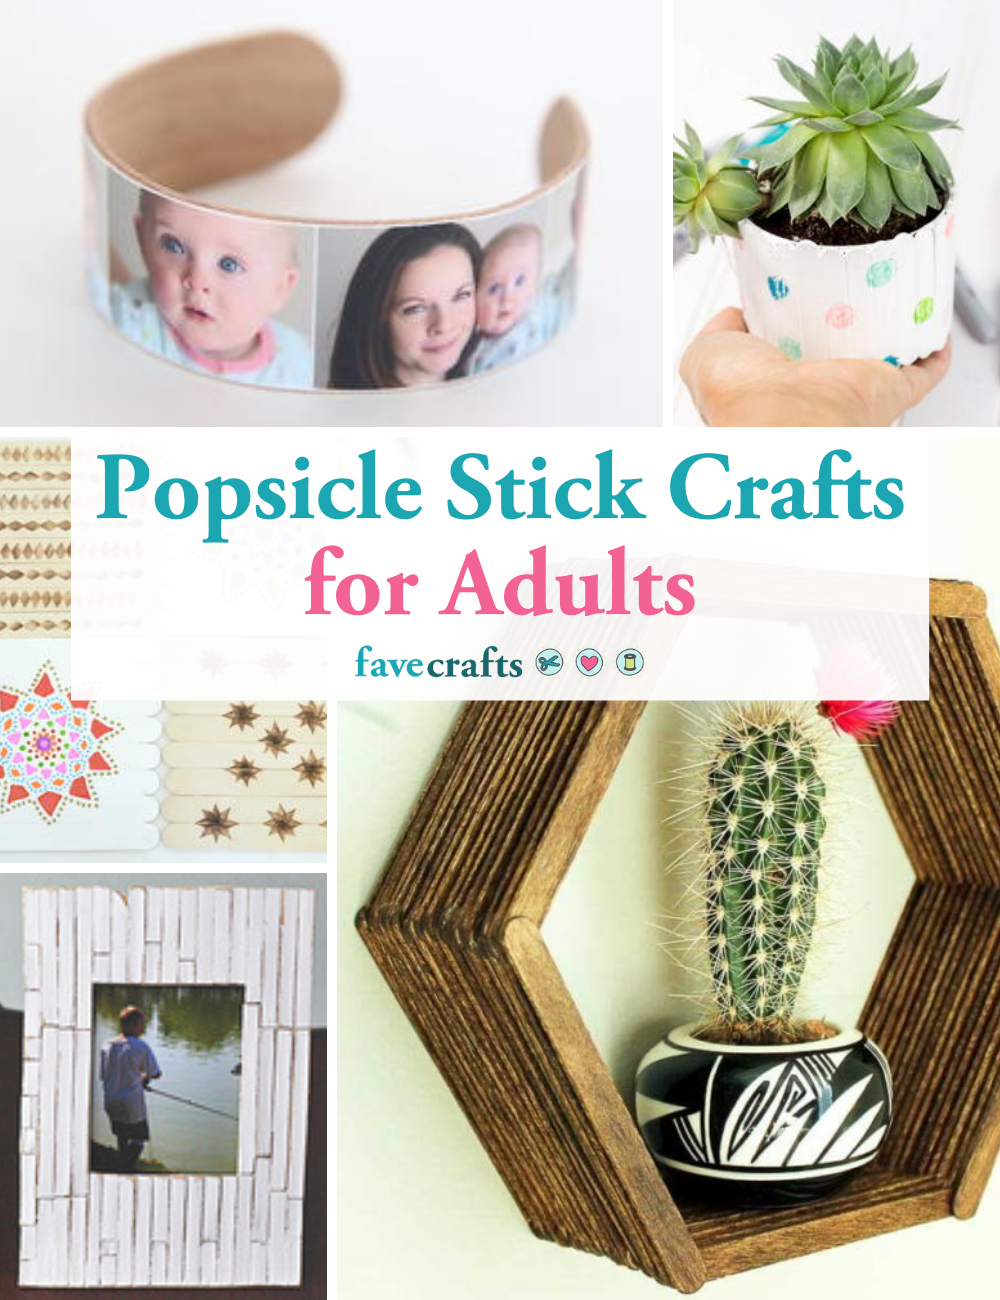 Crafts With Popsicle Sticks - The Ultimate Crafts